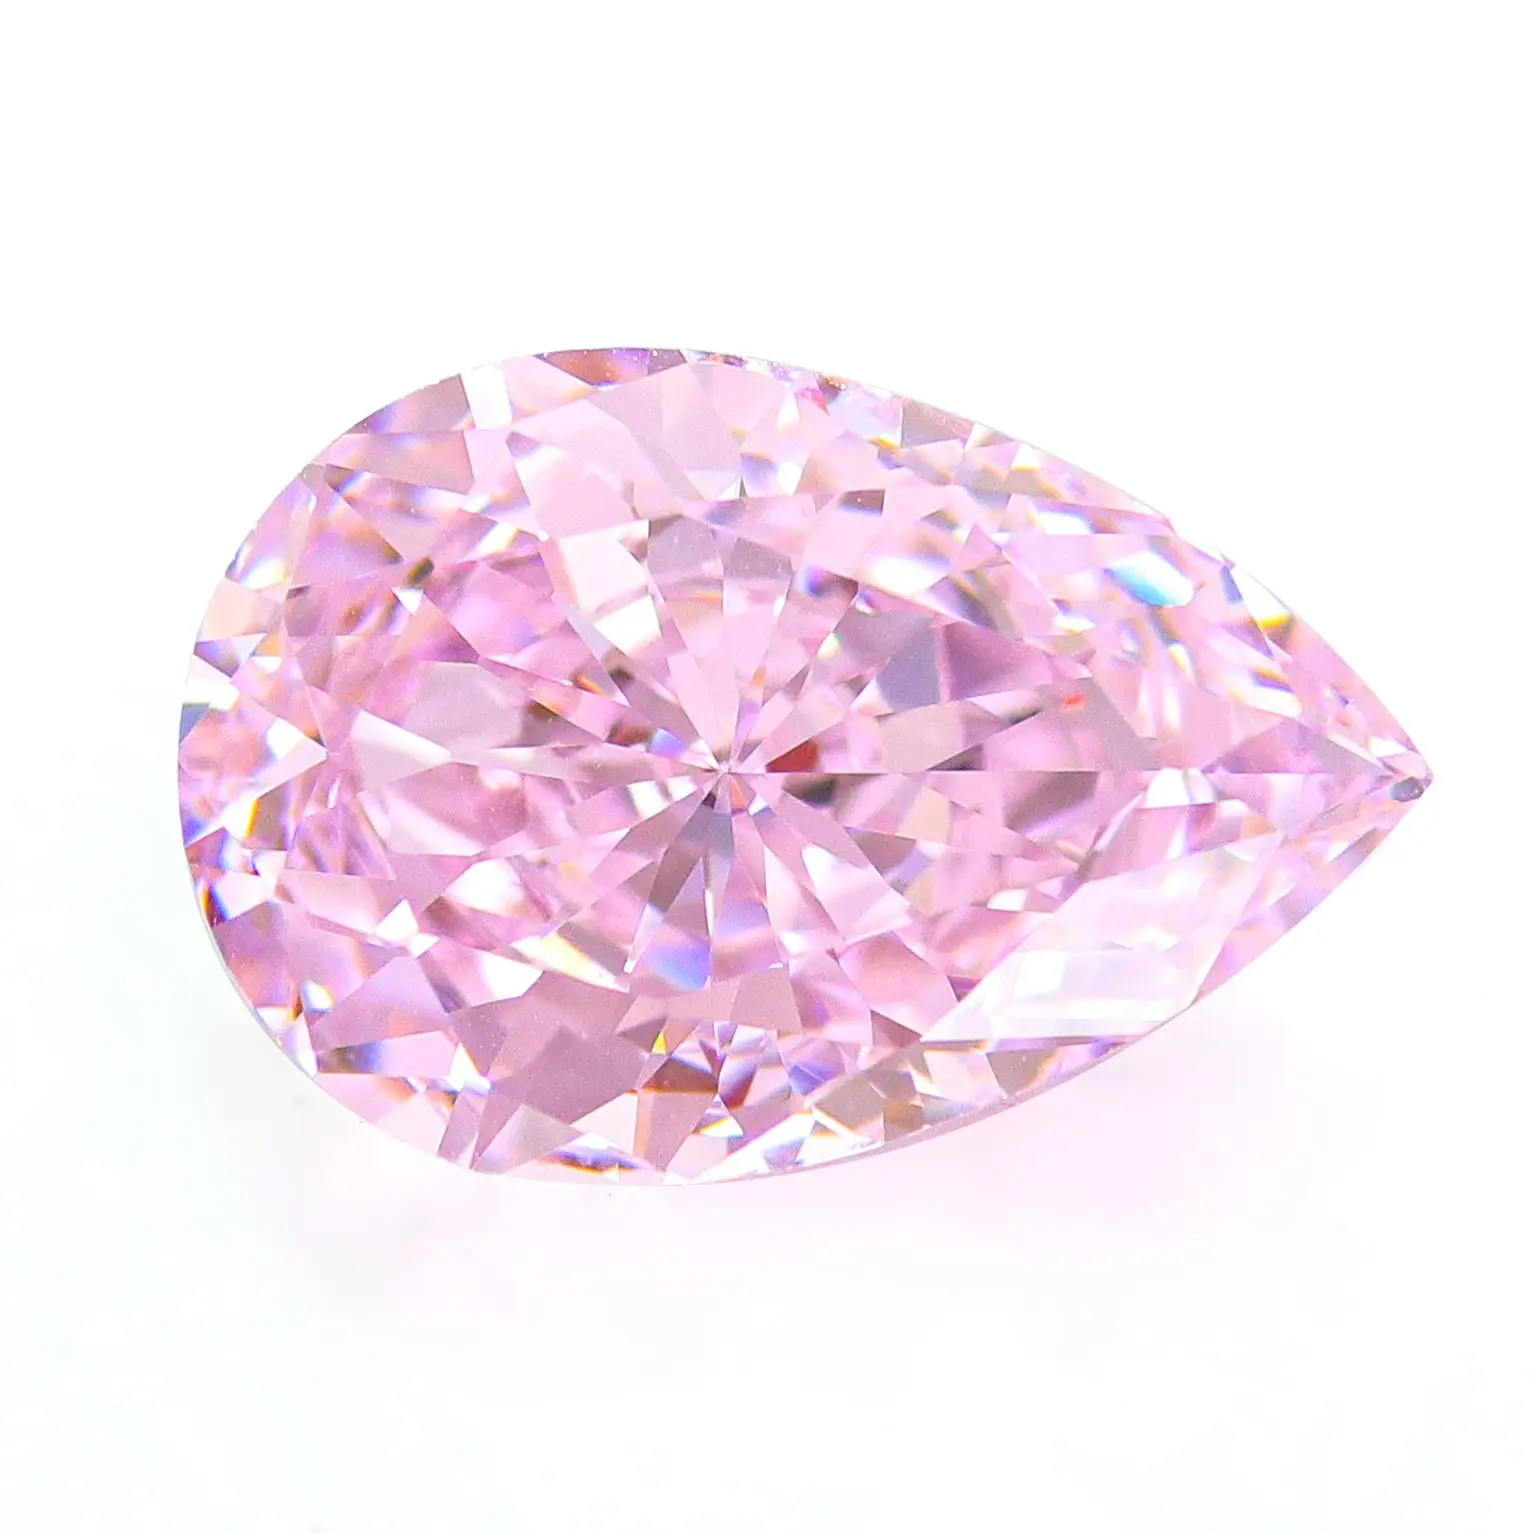 Merence Jewelry Wholesale top quality Crushed Ice Cut Pear Pale Pink Cz Synthetic Cubic Zirconia Gems